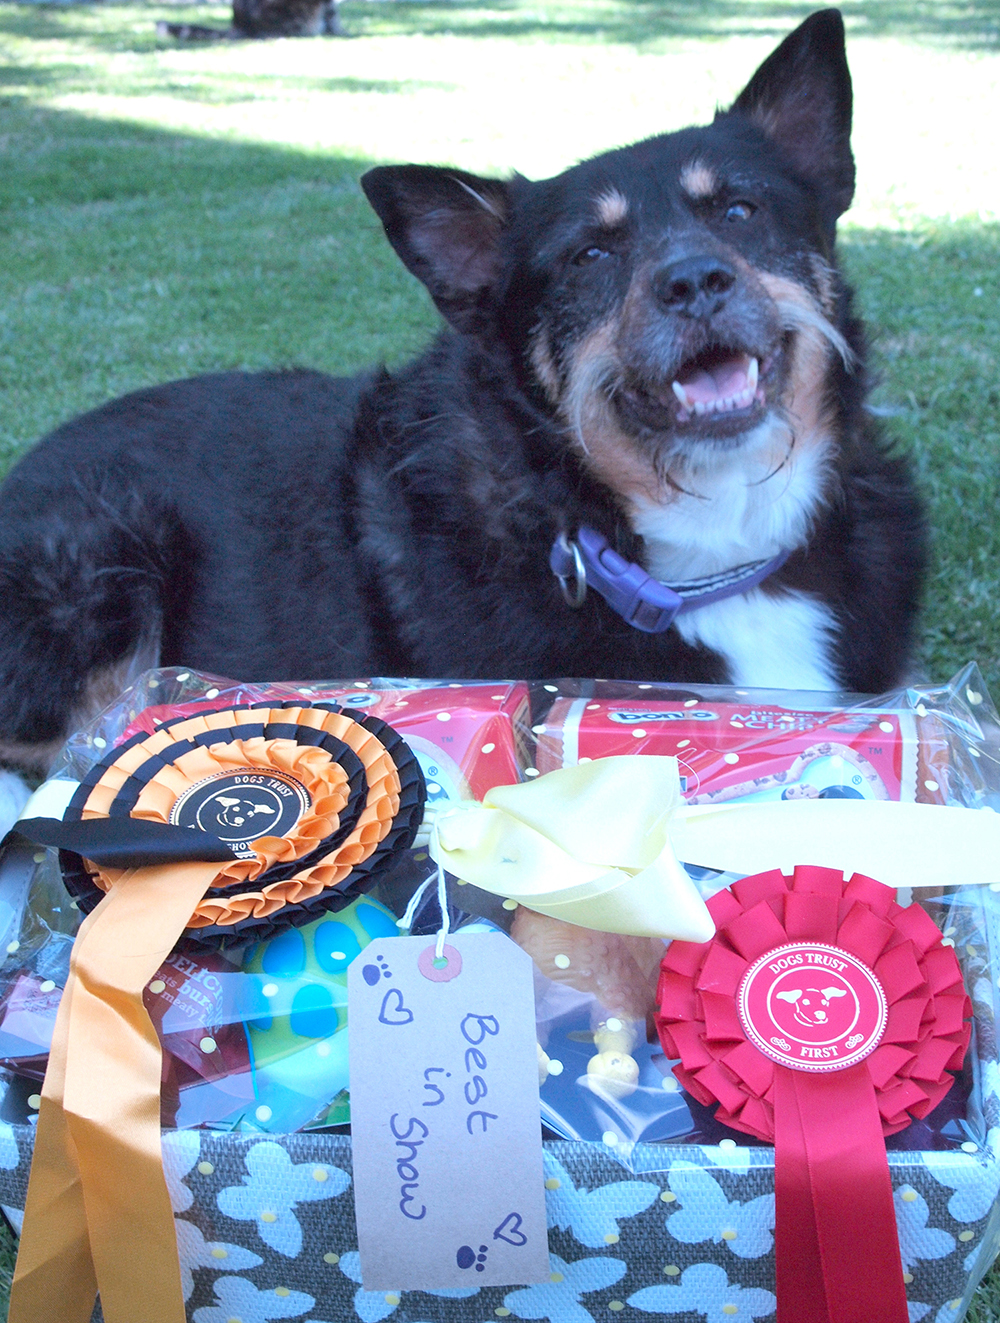 Aycliffe Dog Wins “Best in Show”